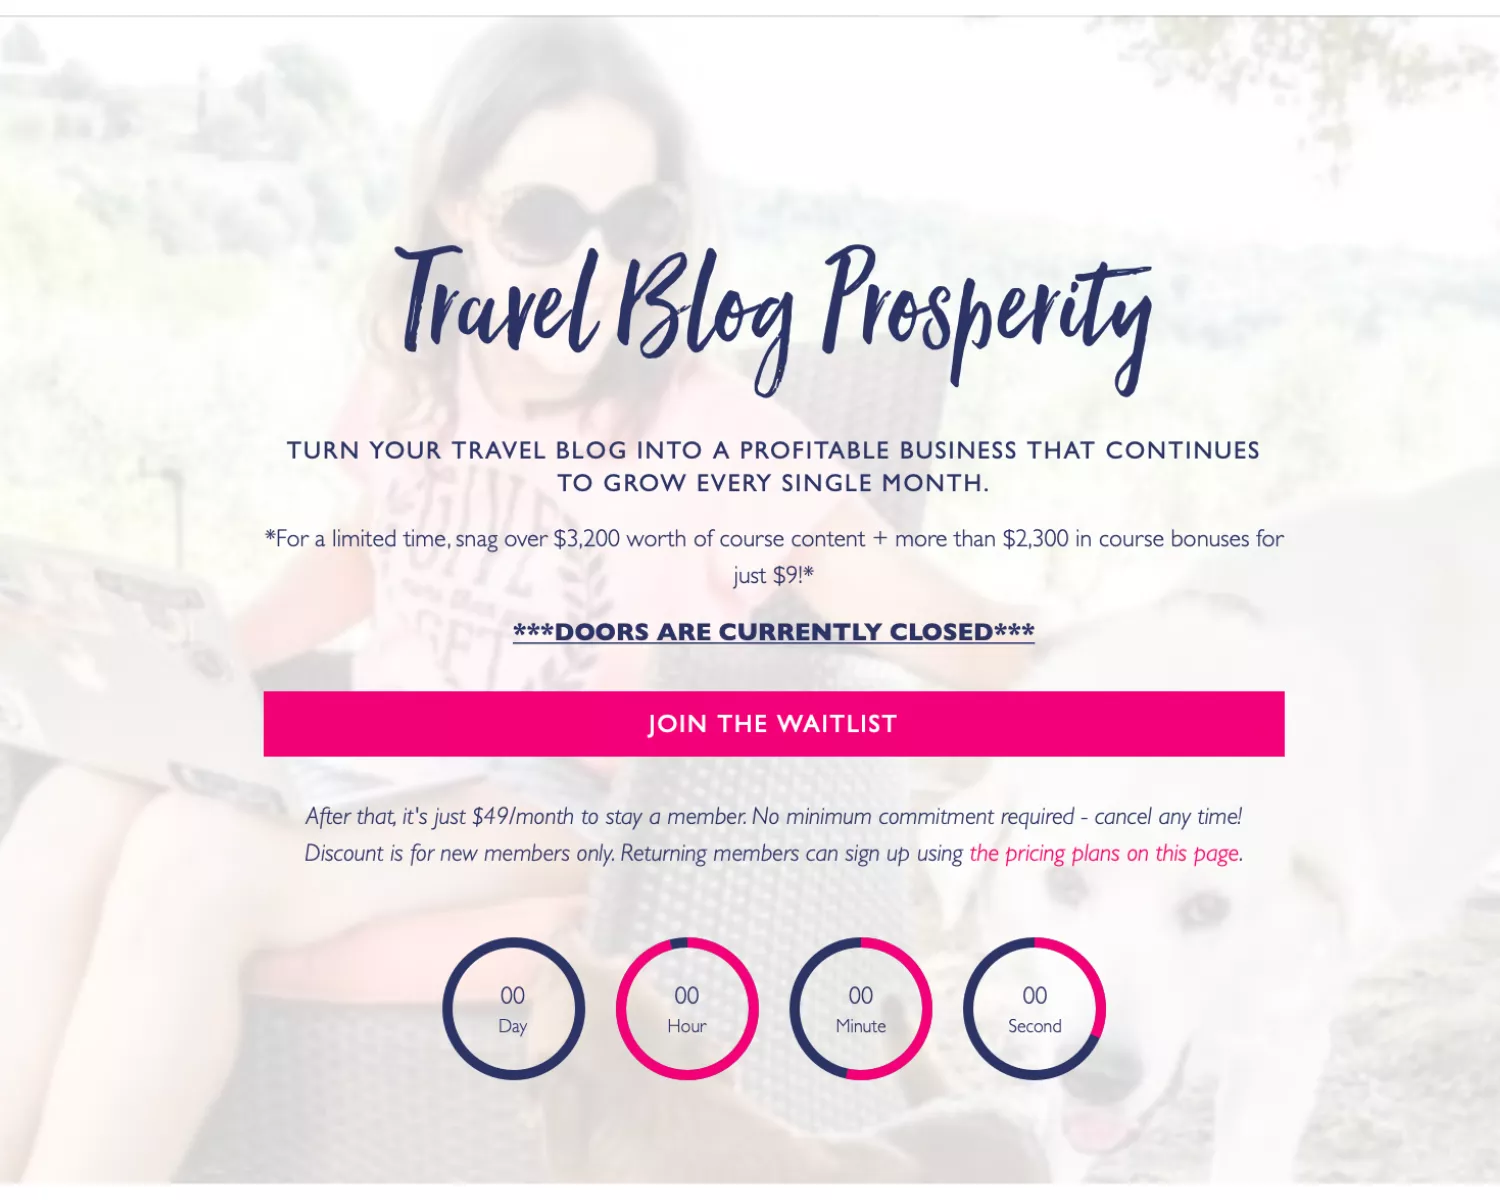 A special offer for Travel Blog Prosperity